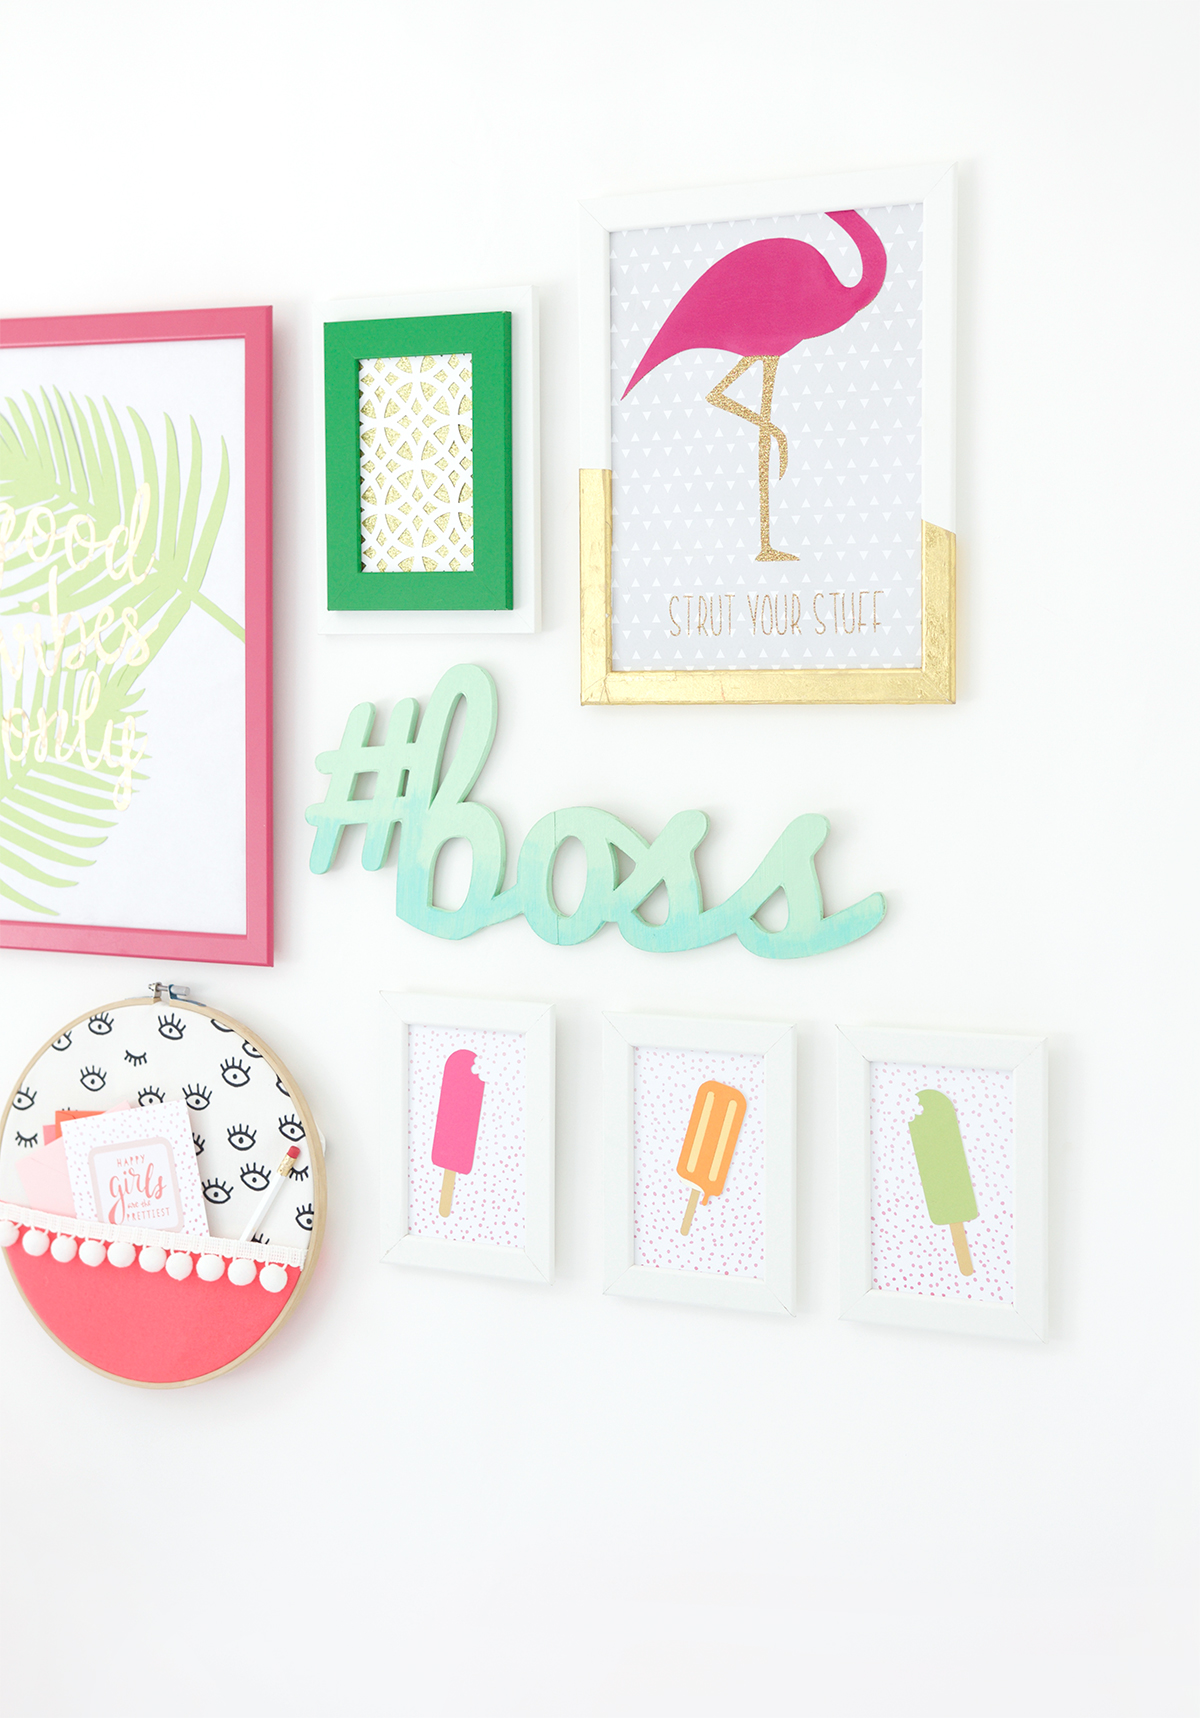 20 diy picture gallery wall